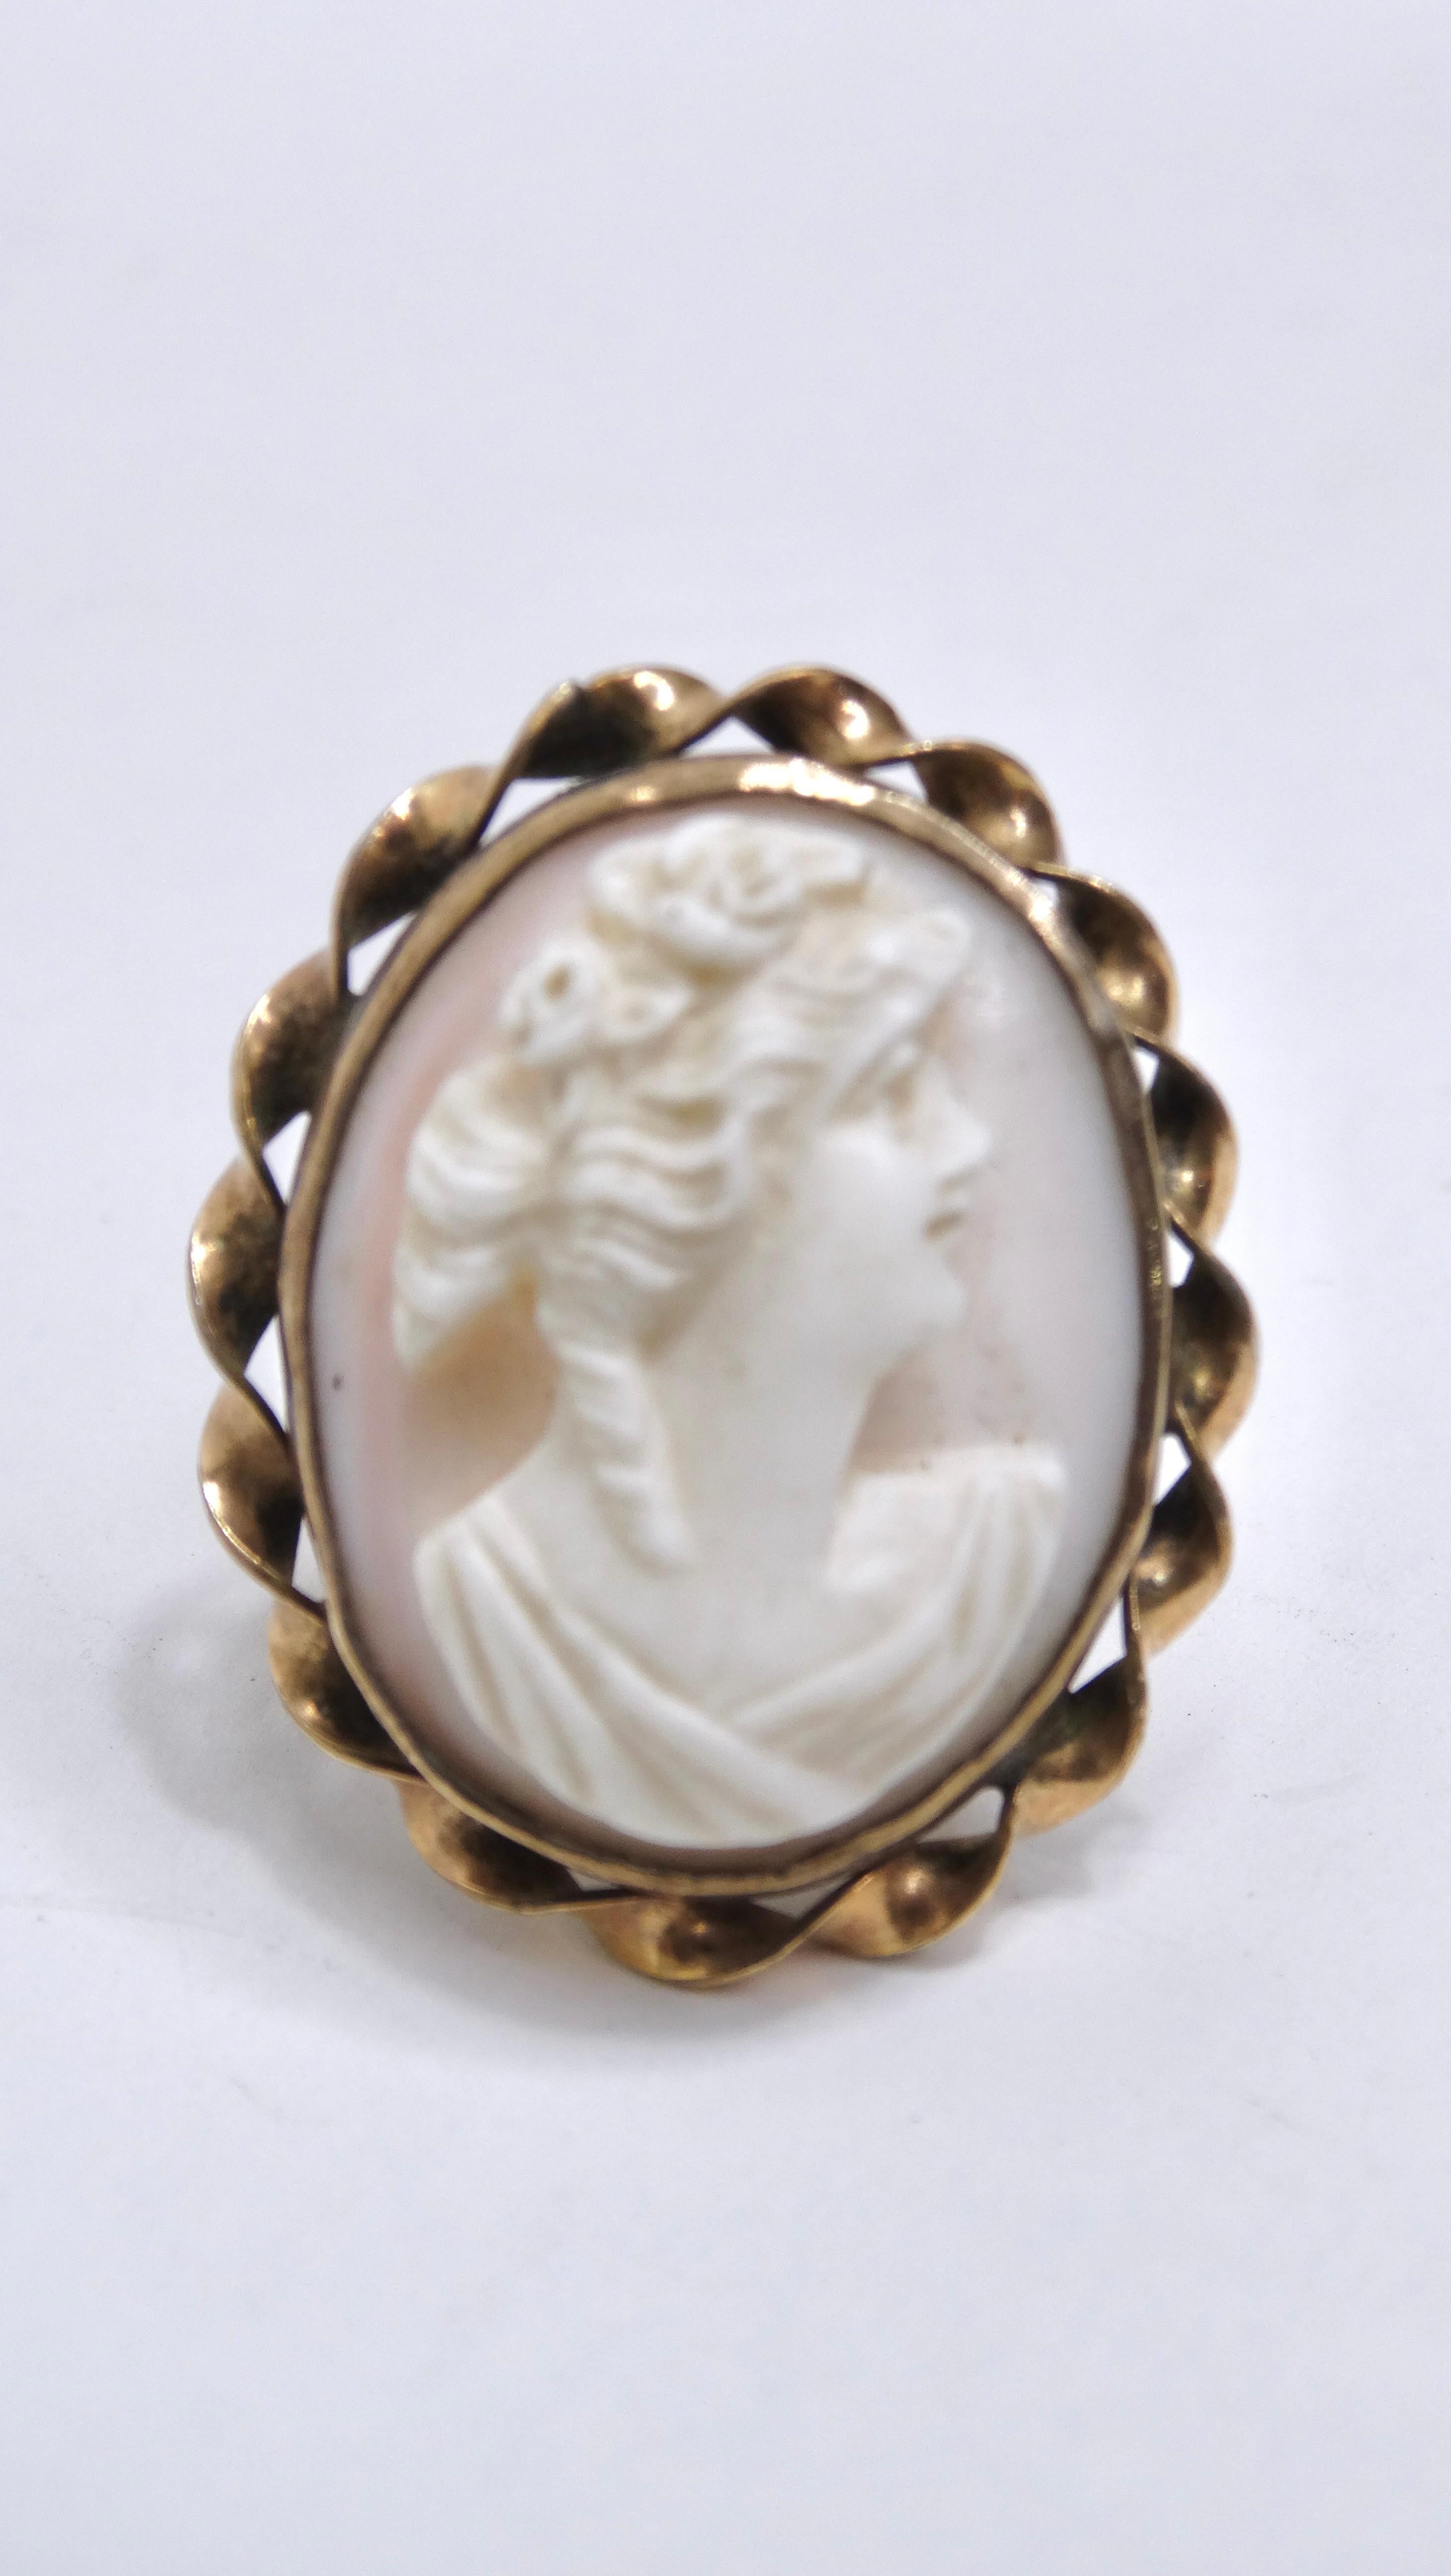 Add a little bit of beauty and effortless to your jewelry collection. Get your hands on this chunky cameo ring today! A cameo is a carvings of either landscapes, portraits, or figures that are usually made out of glass, stones, and shells and are